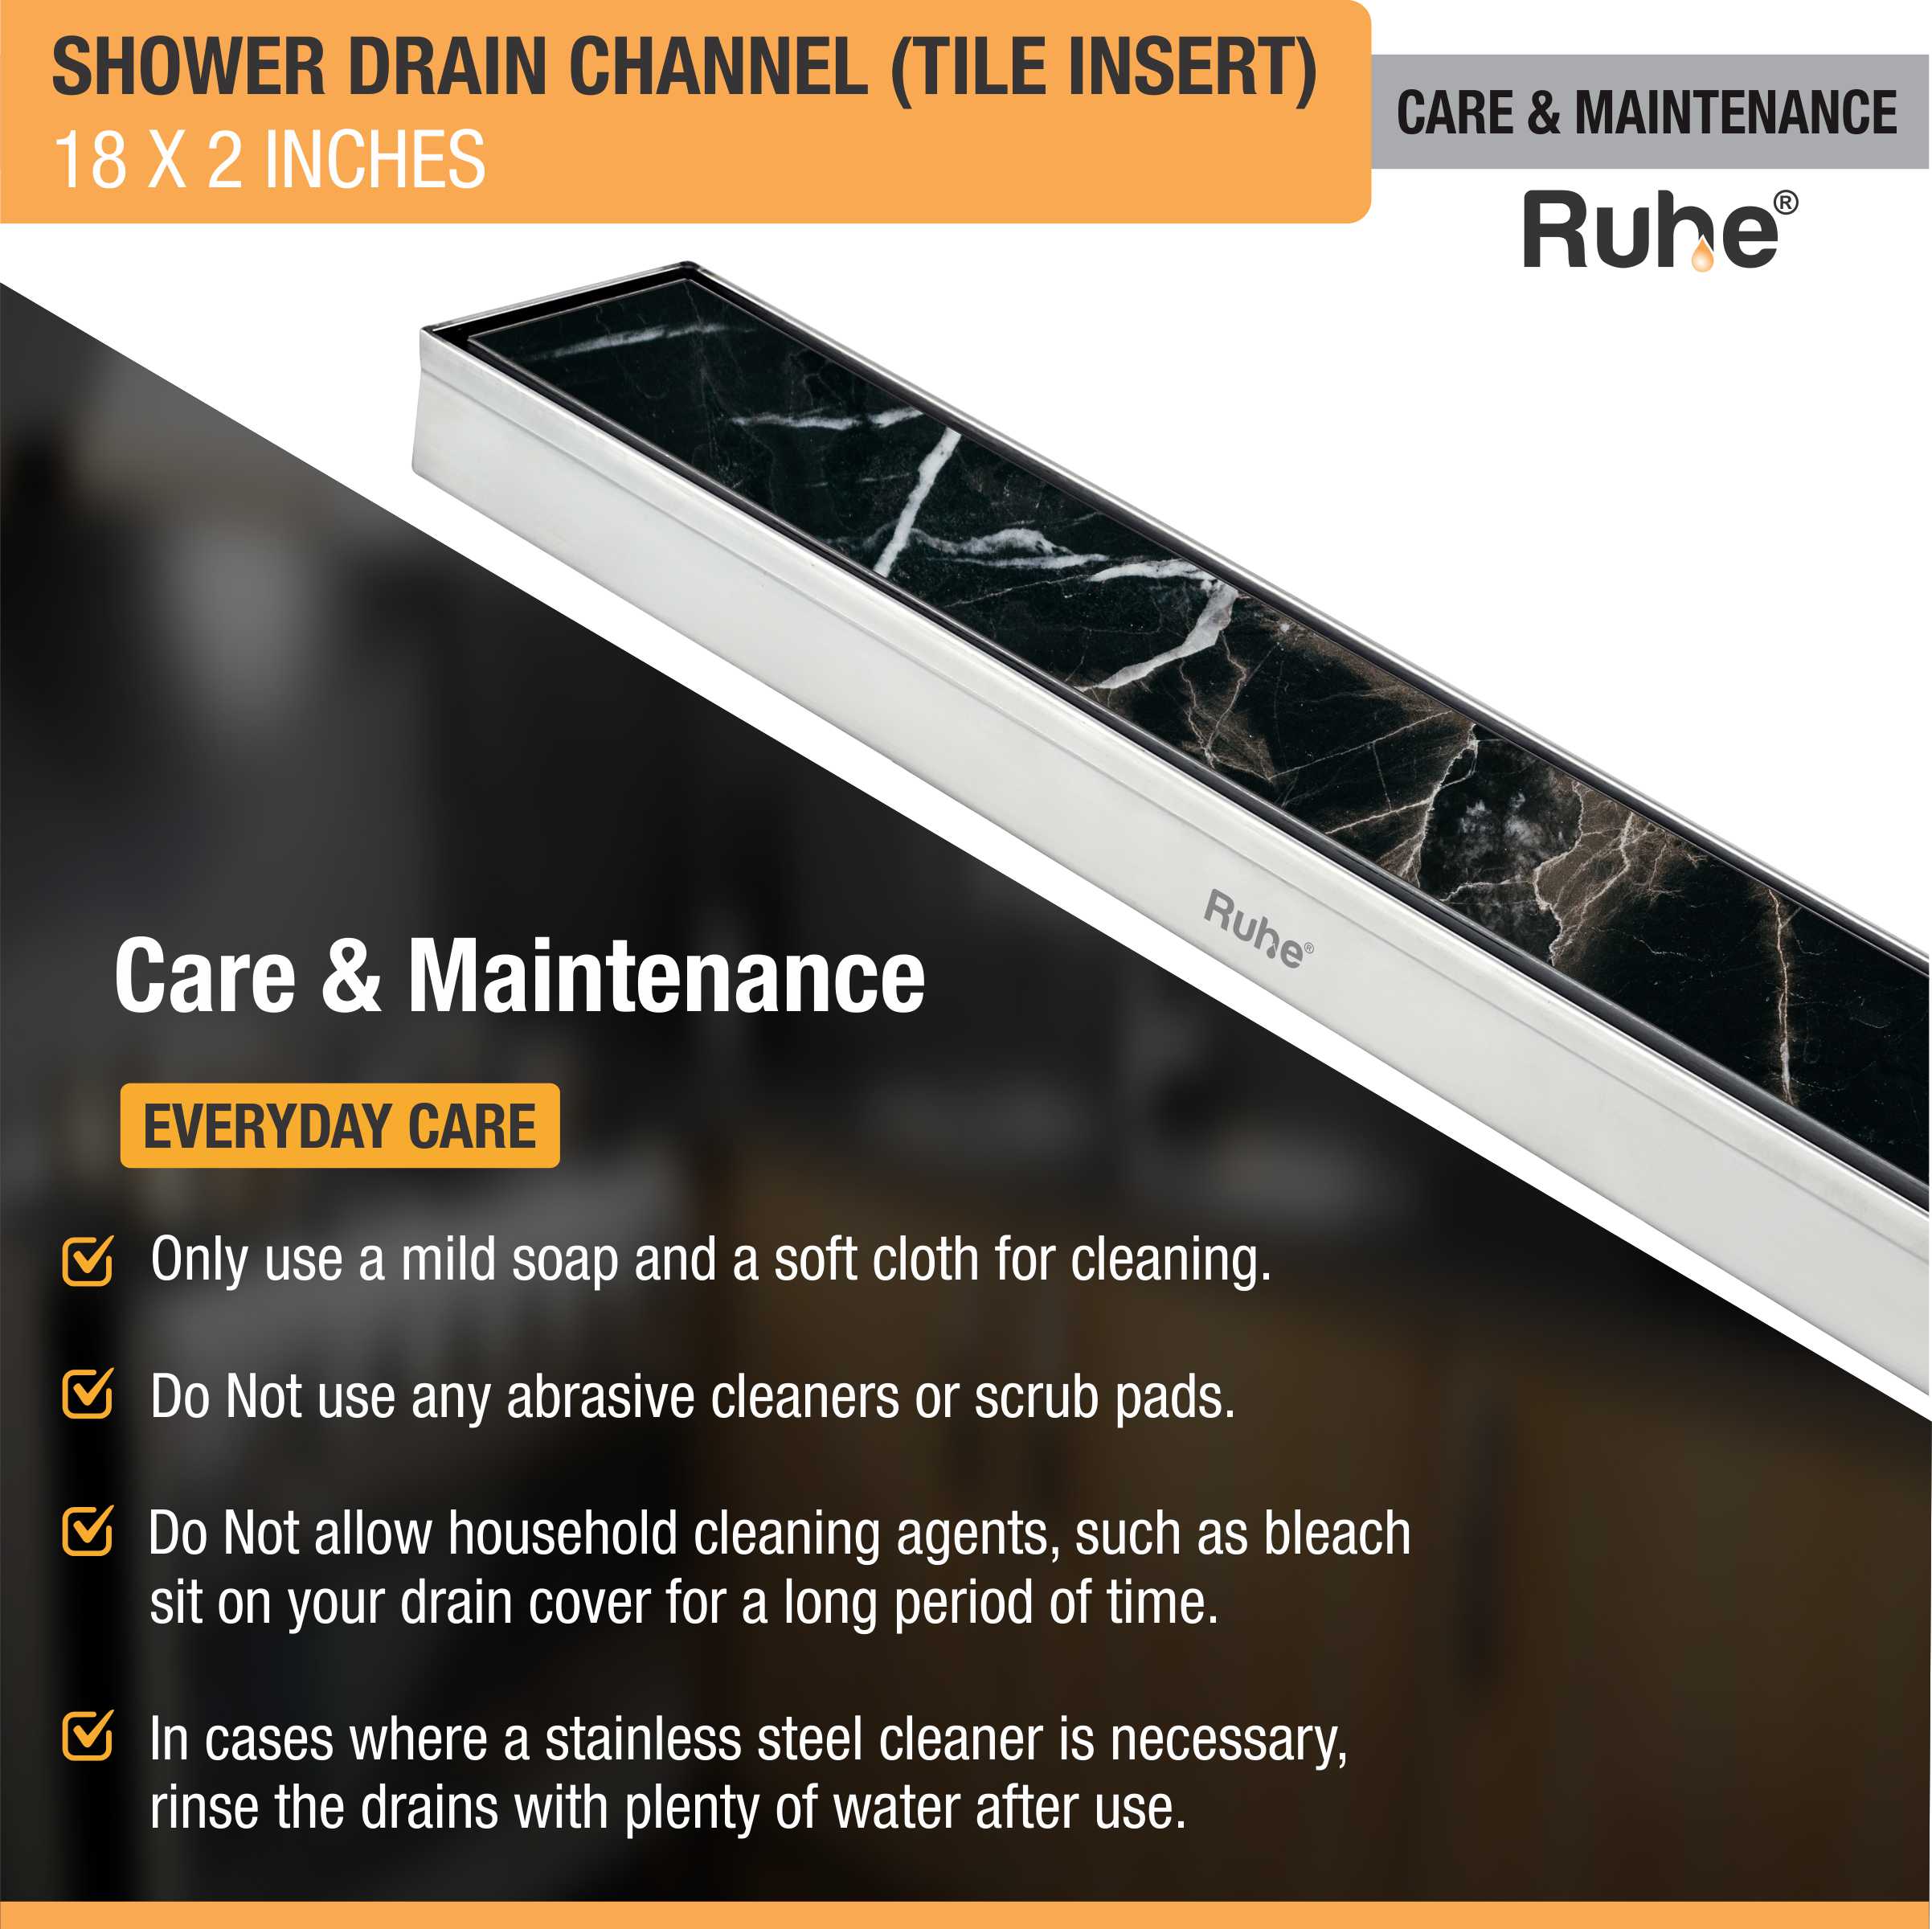 Tile Insert Shower Drain Channel (18 x 2 Inches) (304 Grade) care and maintenance